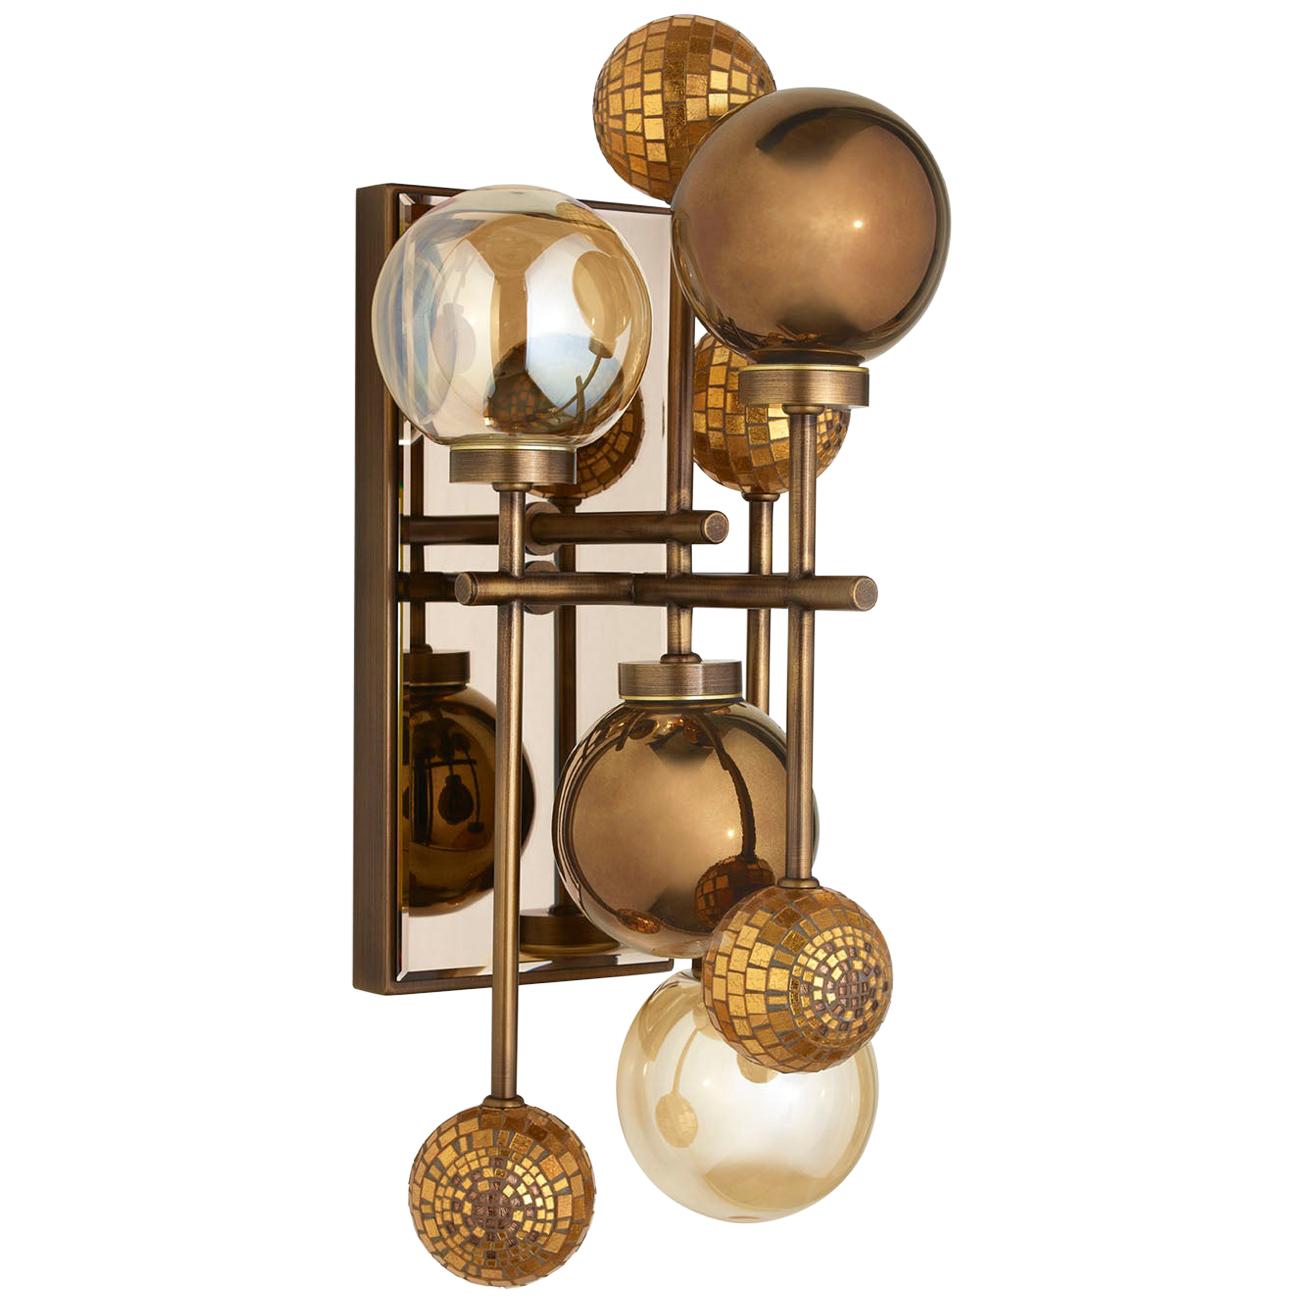 Wall Sconce Brass Frame Nickel or Brass Finish Glass Spheres Artistic Mosaic